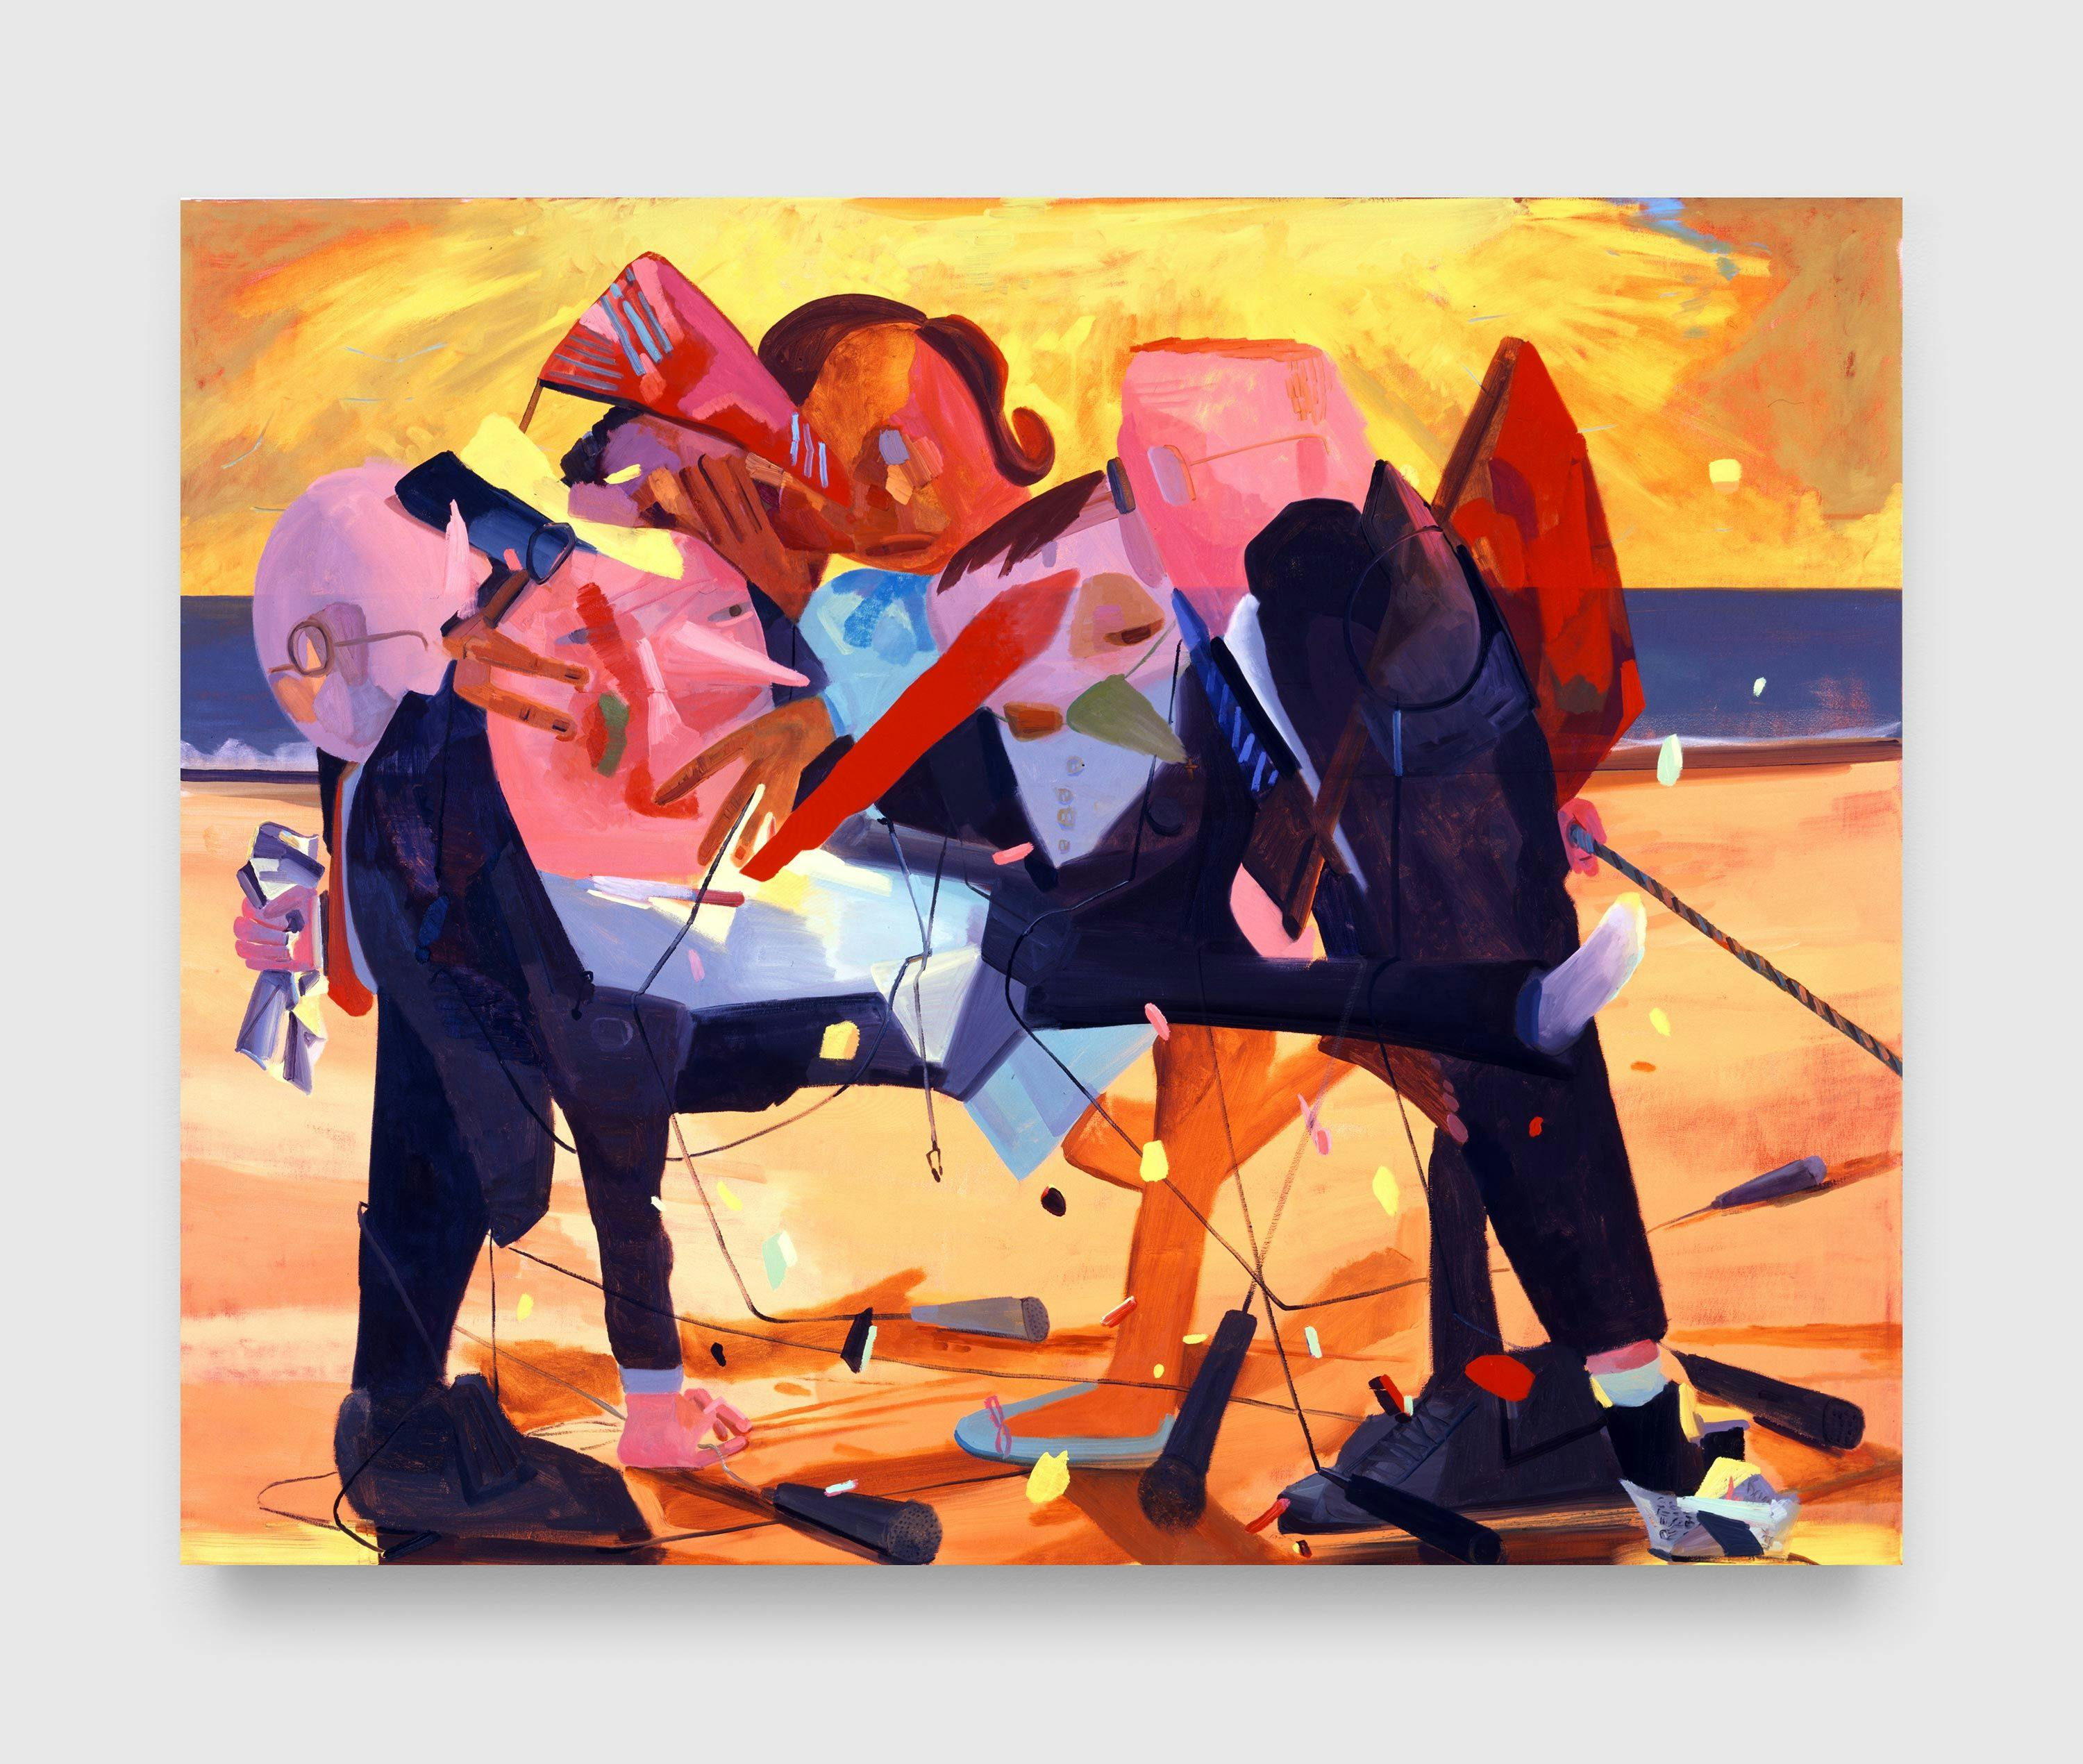 A painting by Dana Schutz, titled Party, dated 2004.